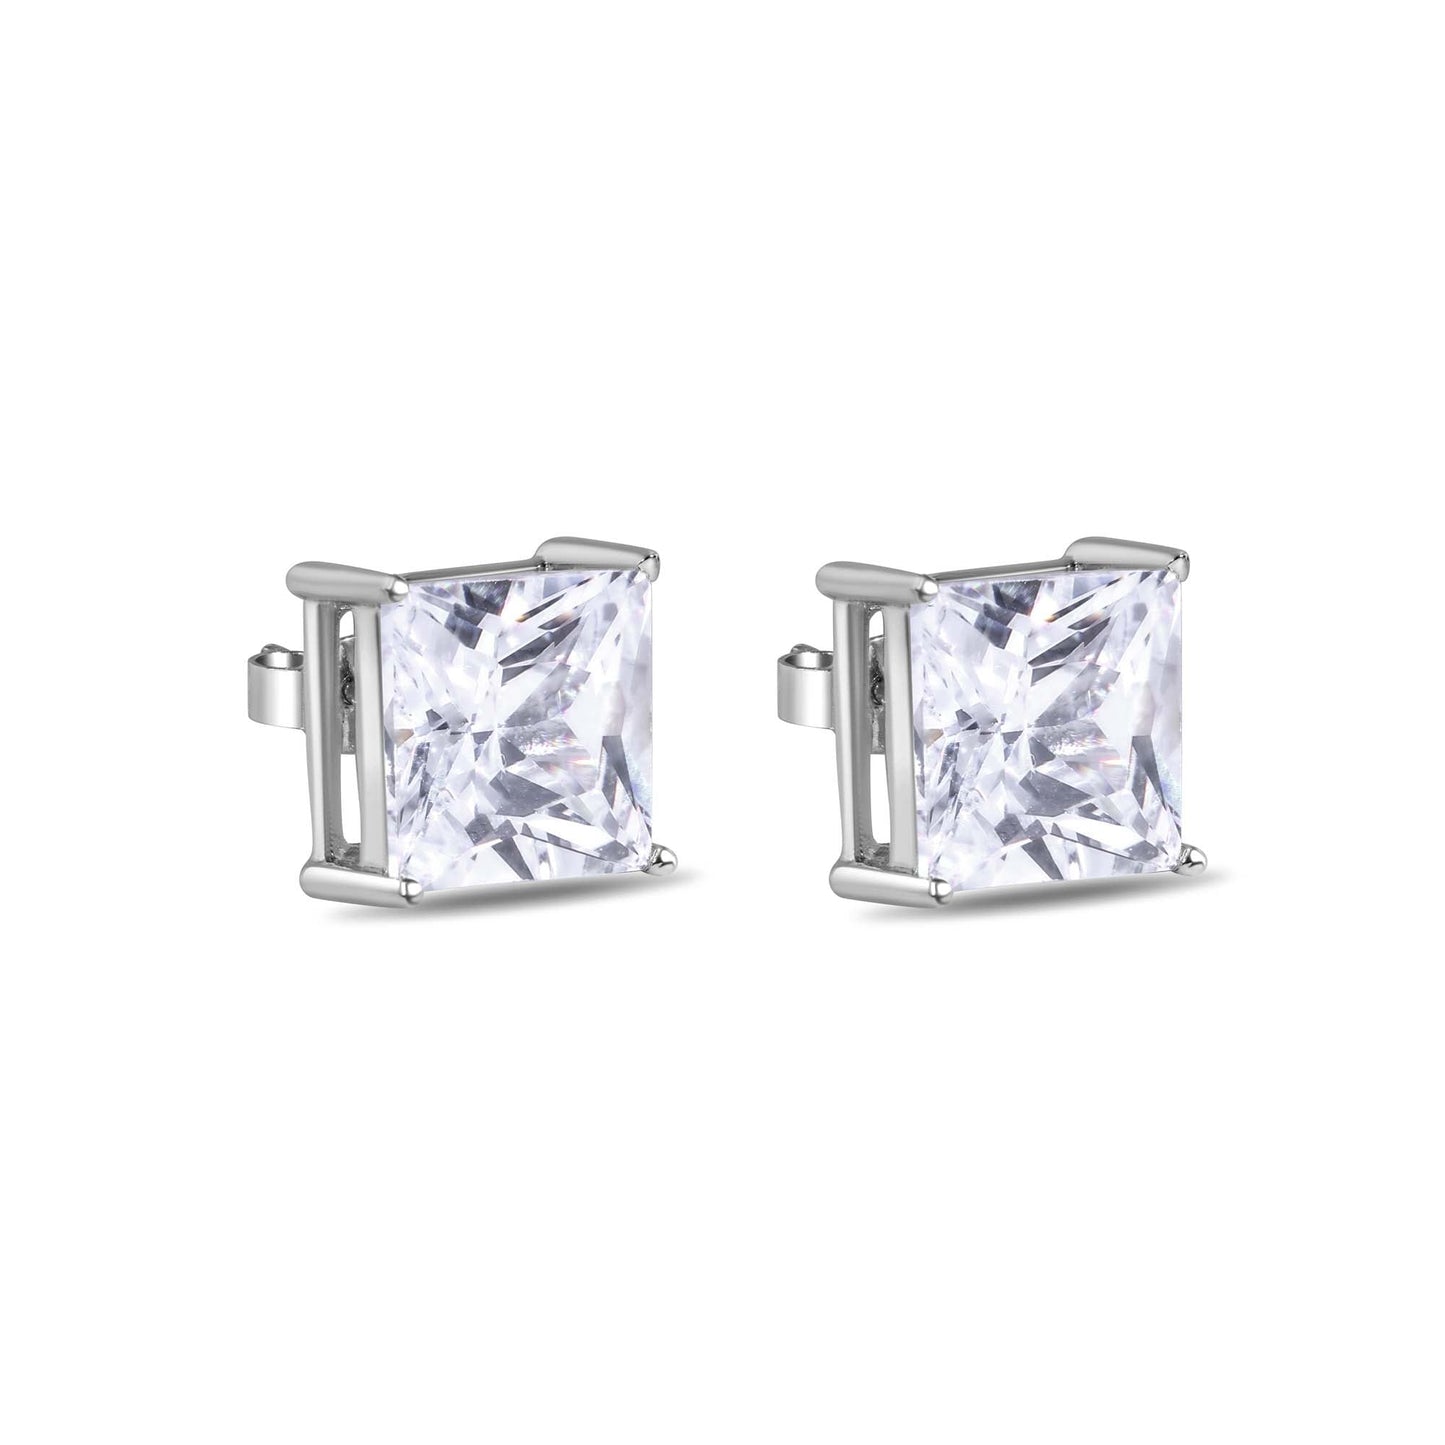 Final Price-Rhodium Plated 925 Sterling Silver Square Clear CZ Earrings 11mm - STEM082